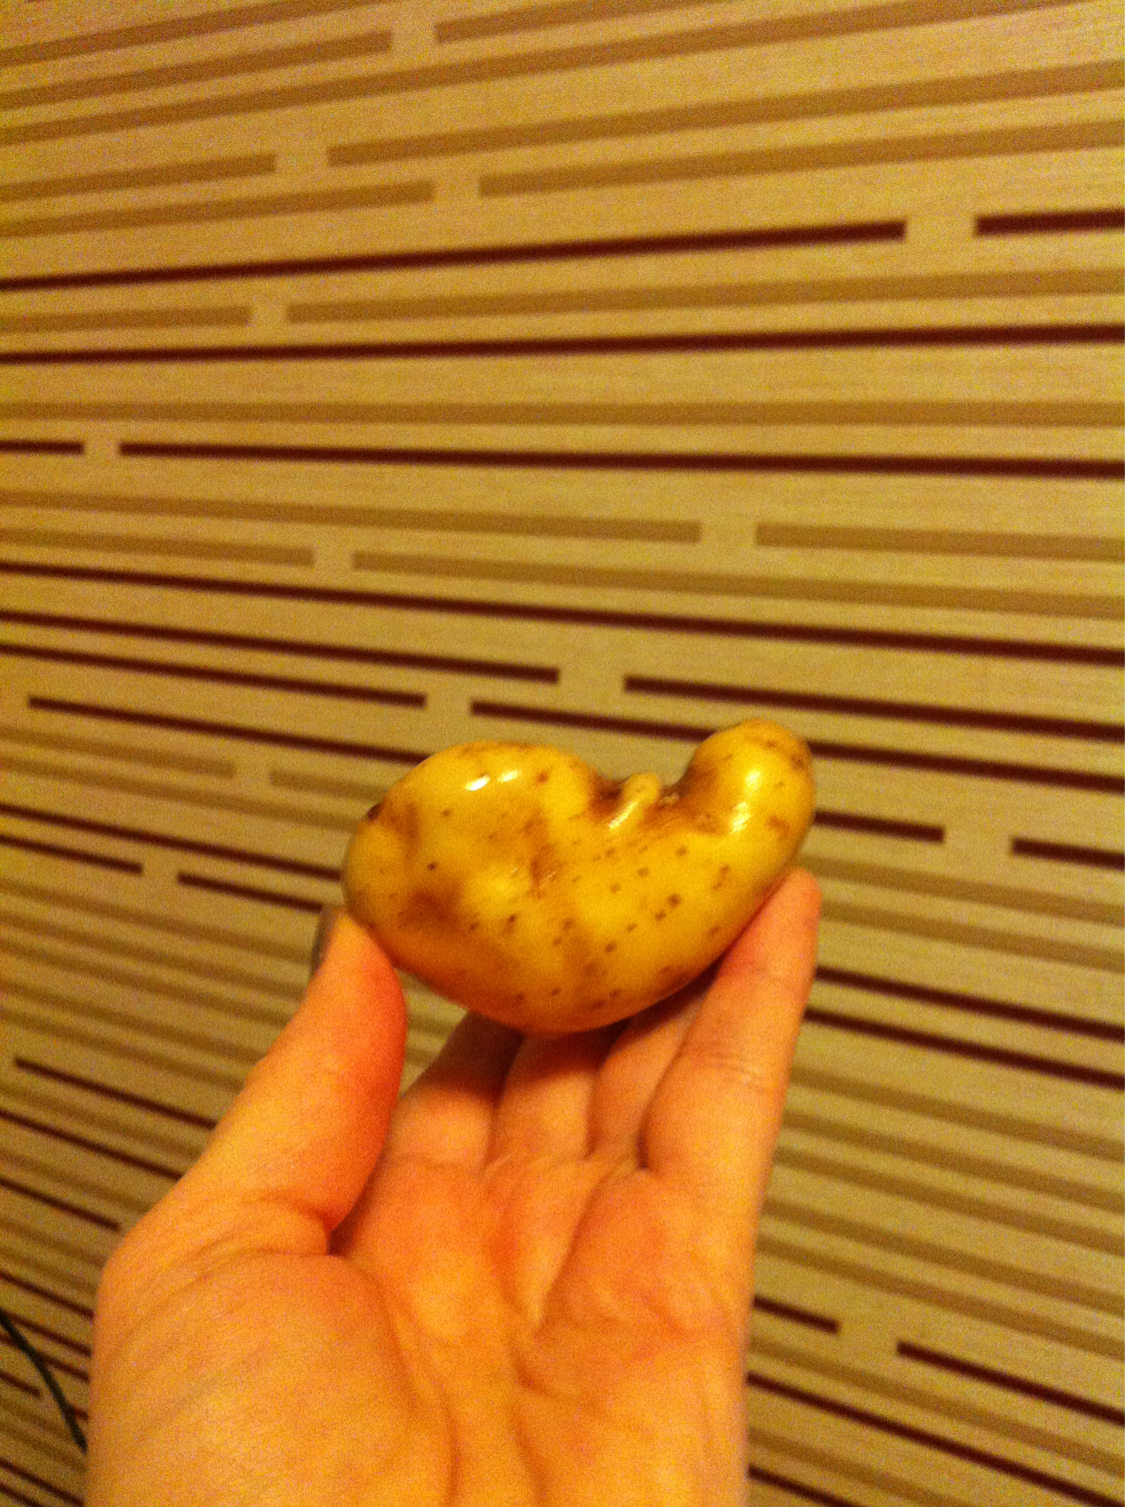 Poteito-Potato or simply potato variations about one potato family - My, Potato, Potatoes of Love, Harvest, Merry harvest, Where the babies come from, Parents, Gardening, Longpost